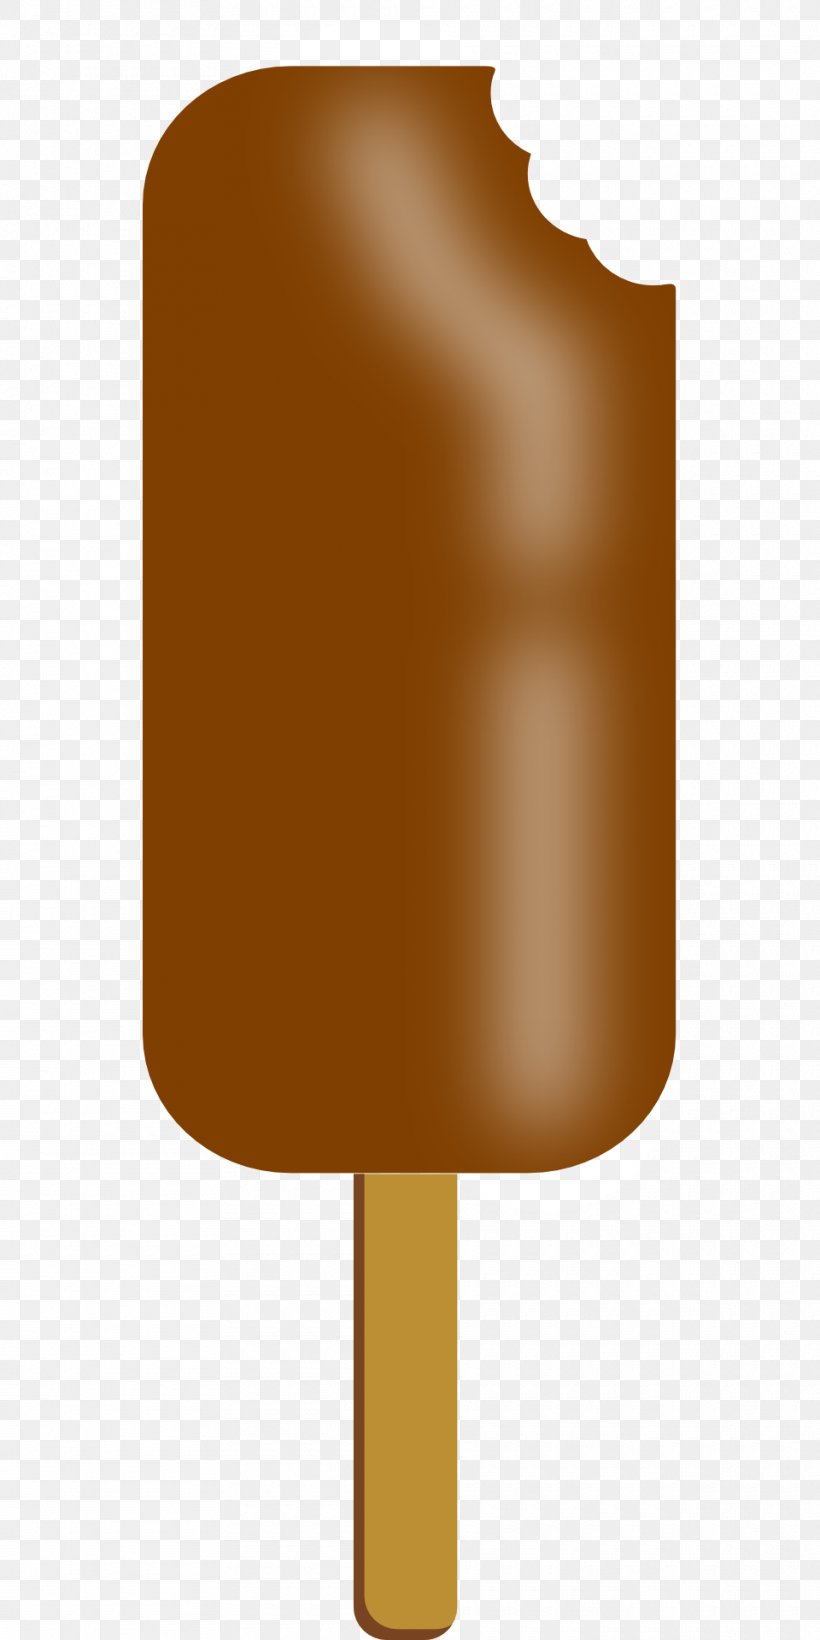 Chocolate Ice Cream Ice Pop Clip Art, PNG, 960x1920px, Ice Cream, Chocolate, Chocolate Ice Cream, Dessert, Drawing Download Free